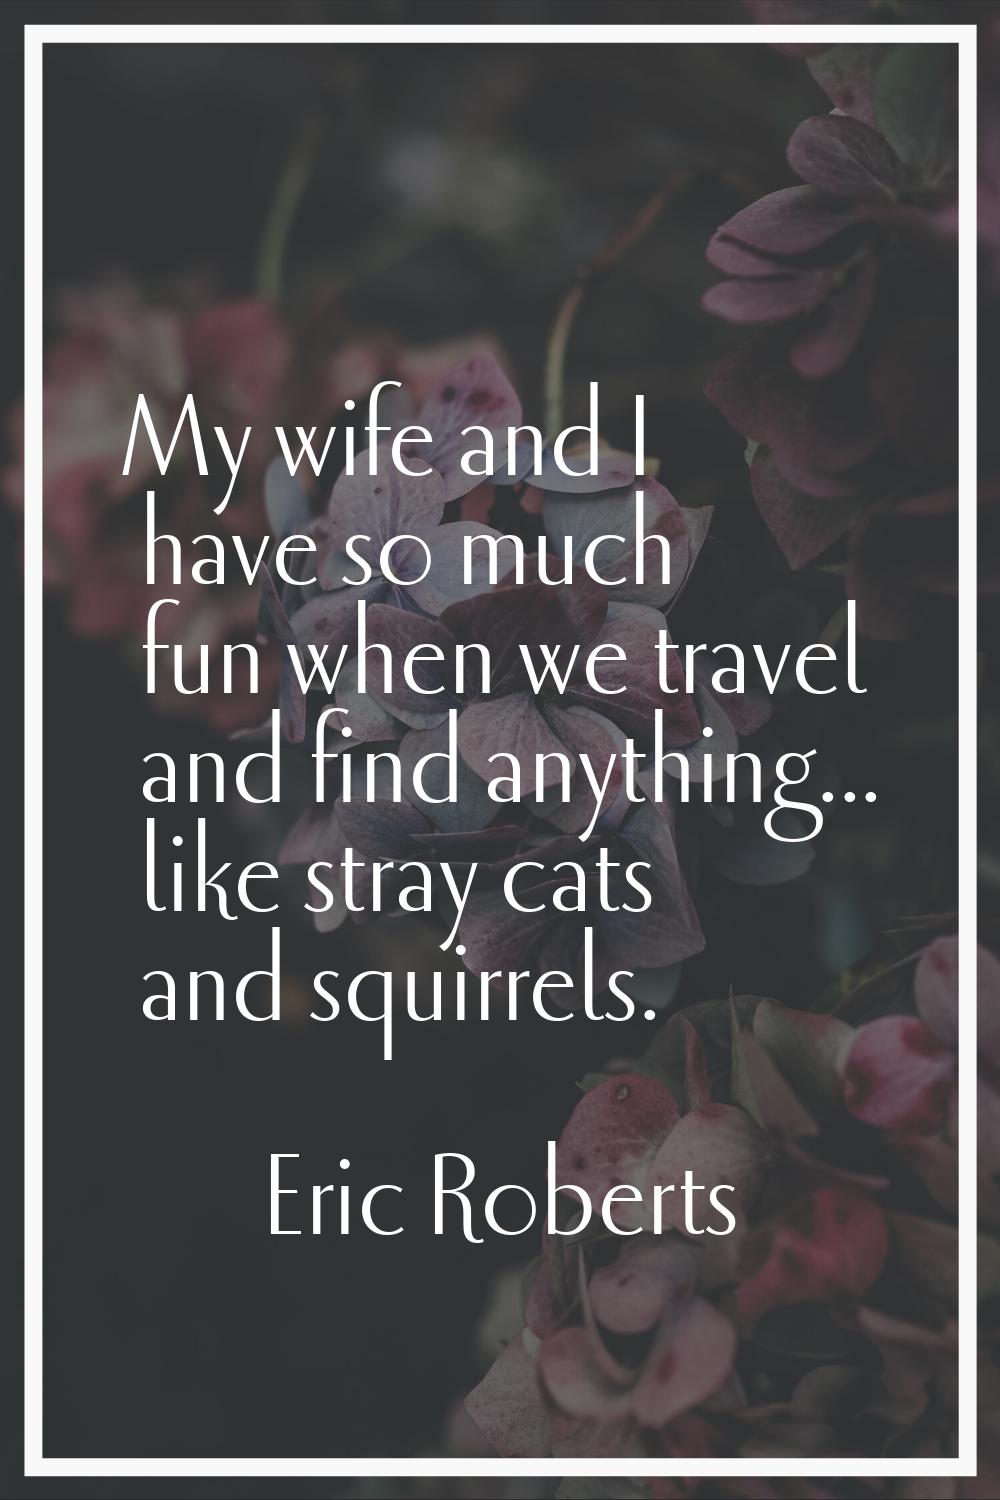 My wife and I have so much fun when we travel and find anything... like stray cats and squirrels.